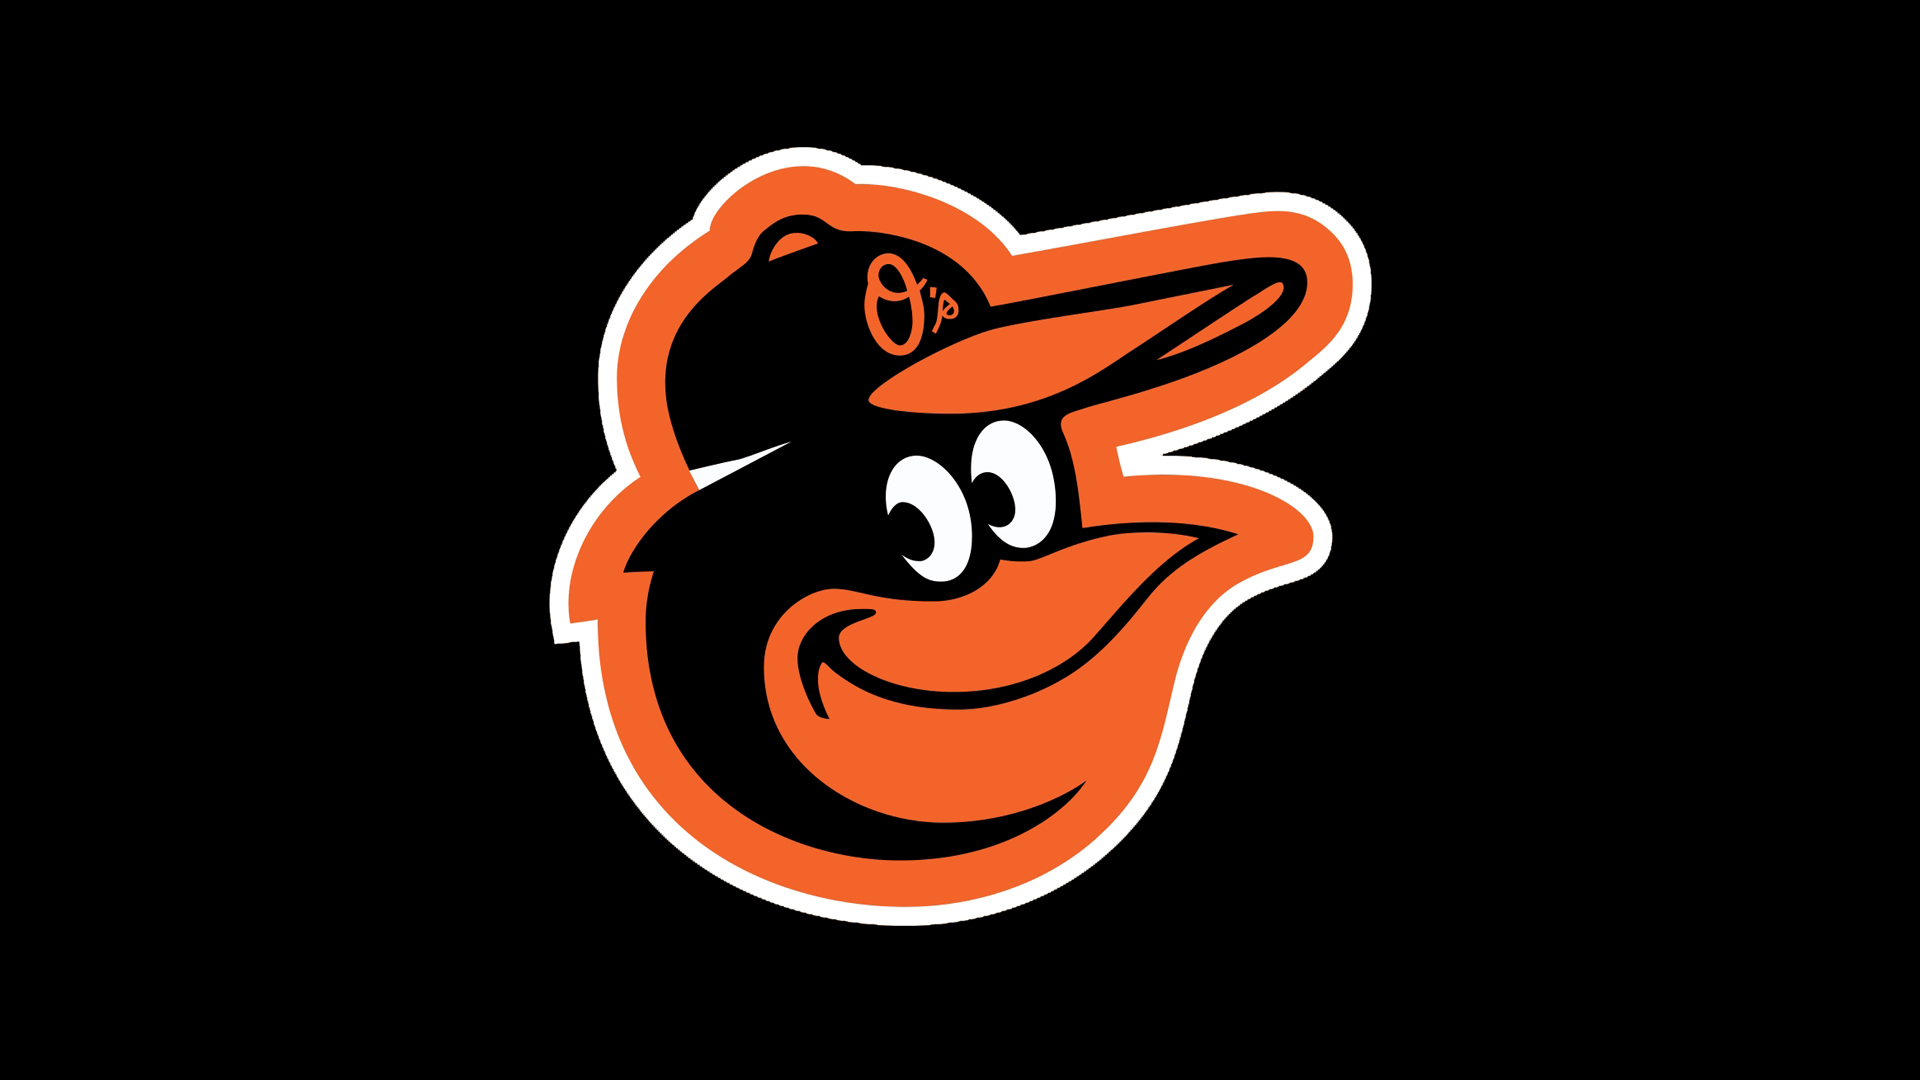 2023 Baltimore Orioles wallpaper  Pro Sports Backgrounds